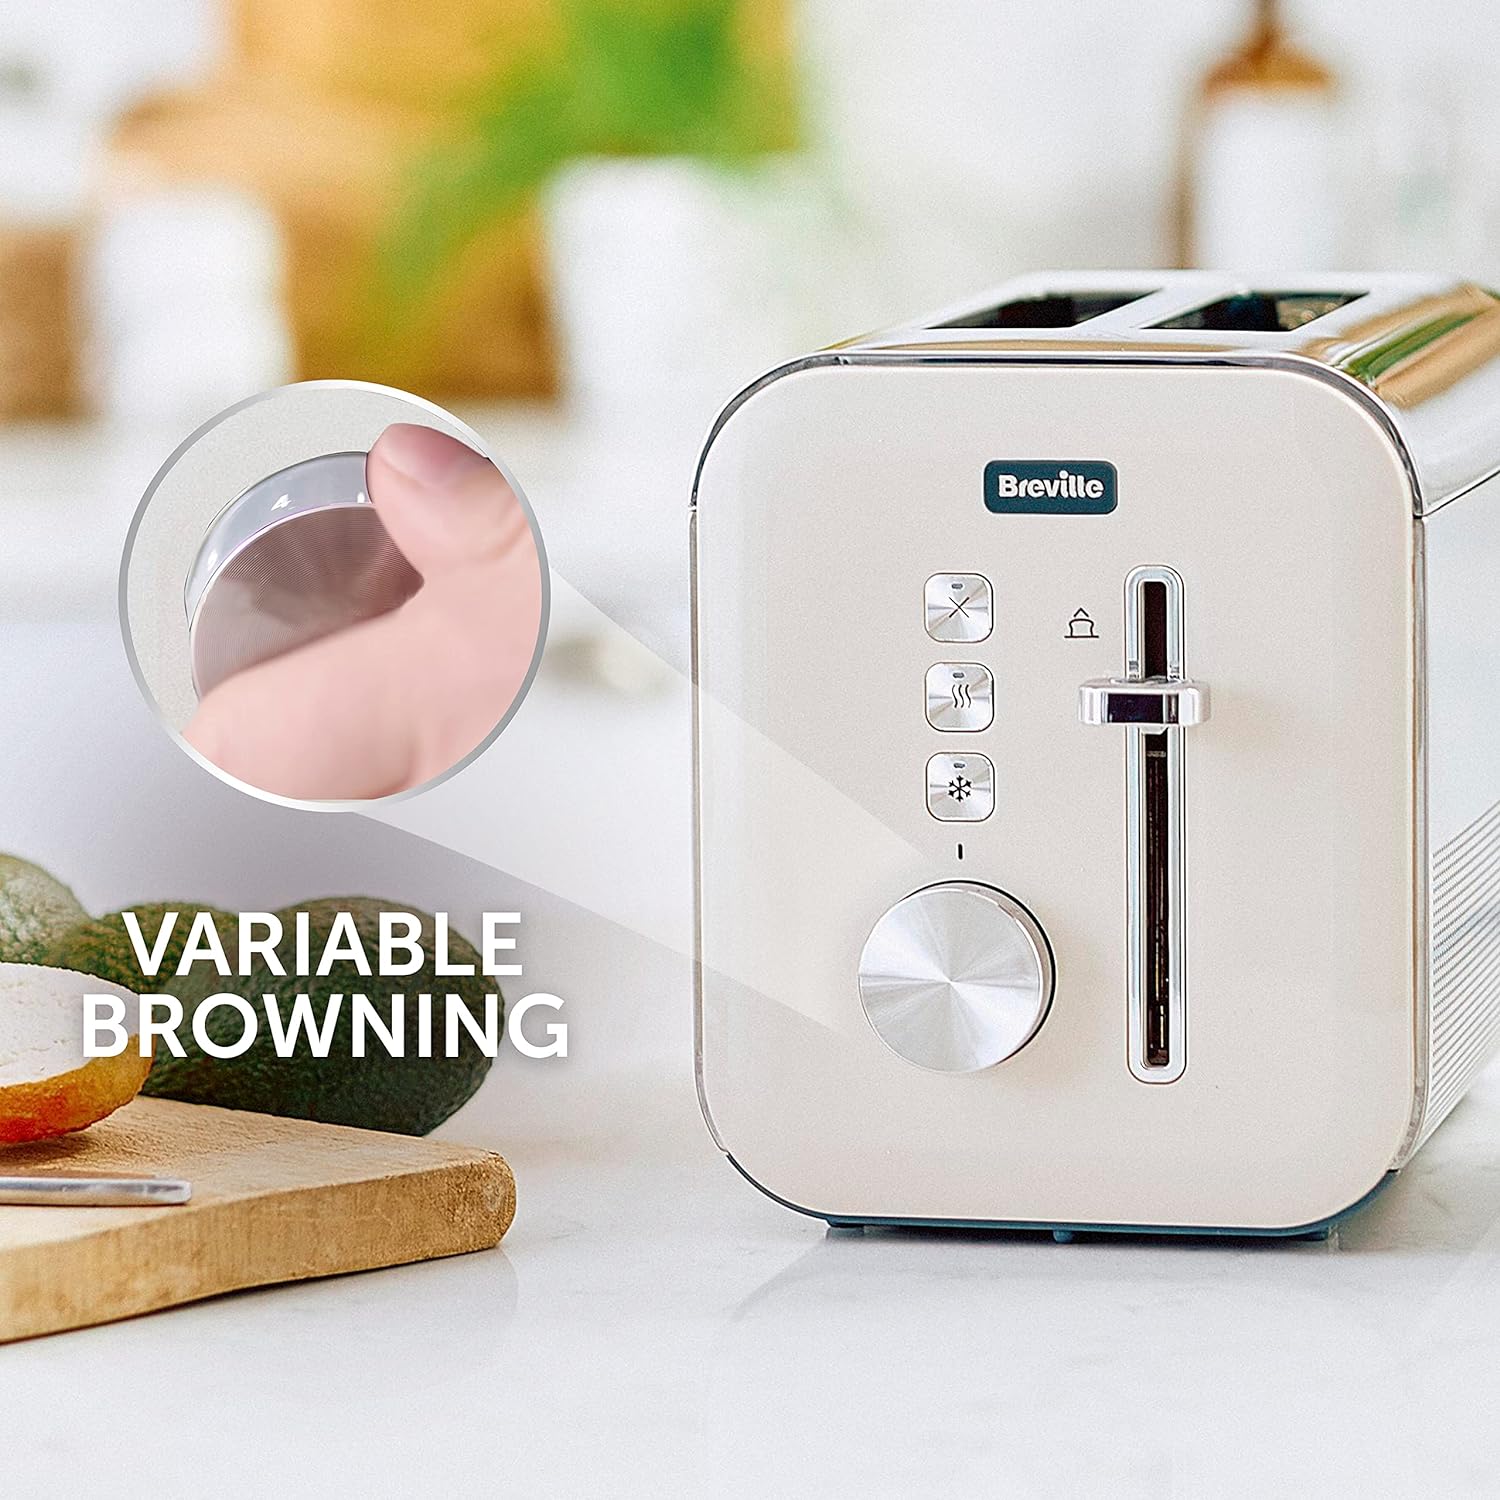 Breville High Gloss 2-Slice Toaster with High-Lift & Wide Slots | Cream & Stainless Steel [VTT967]